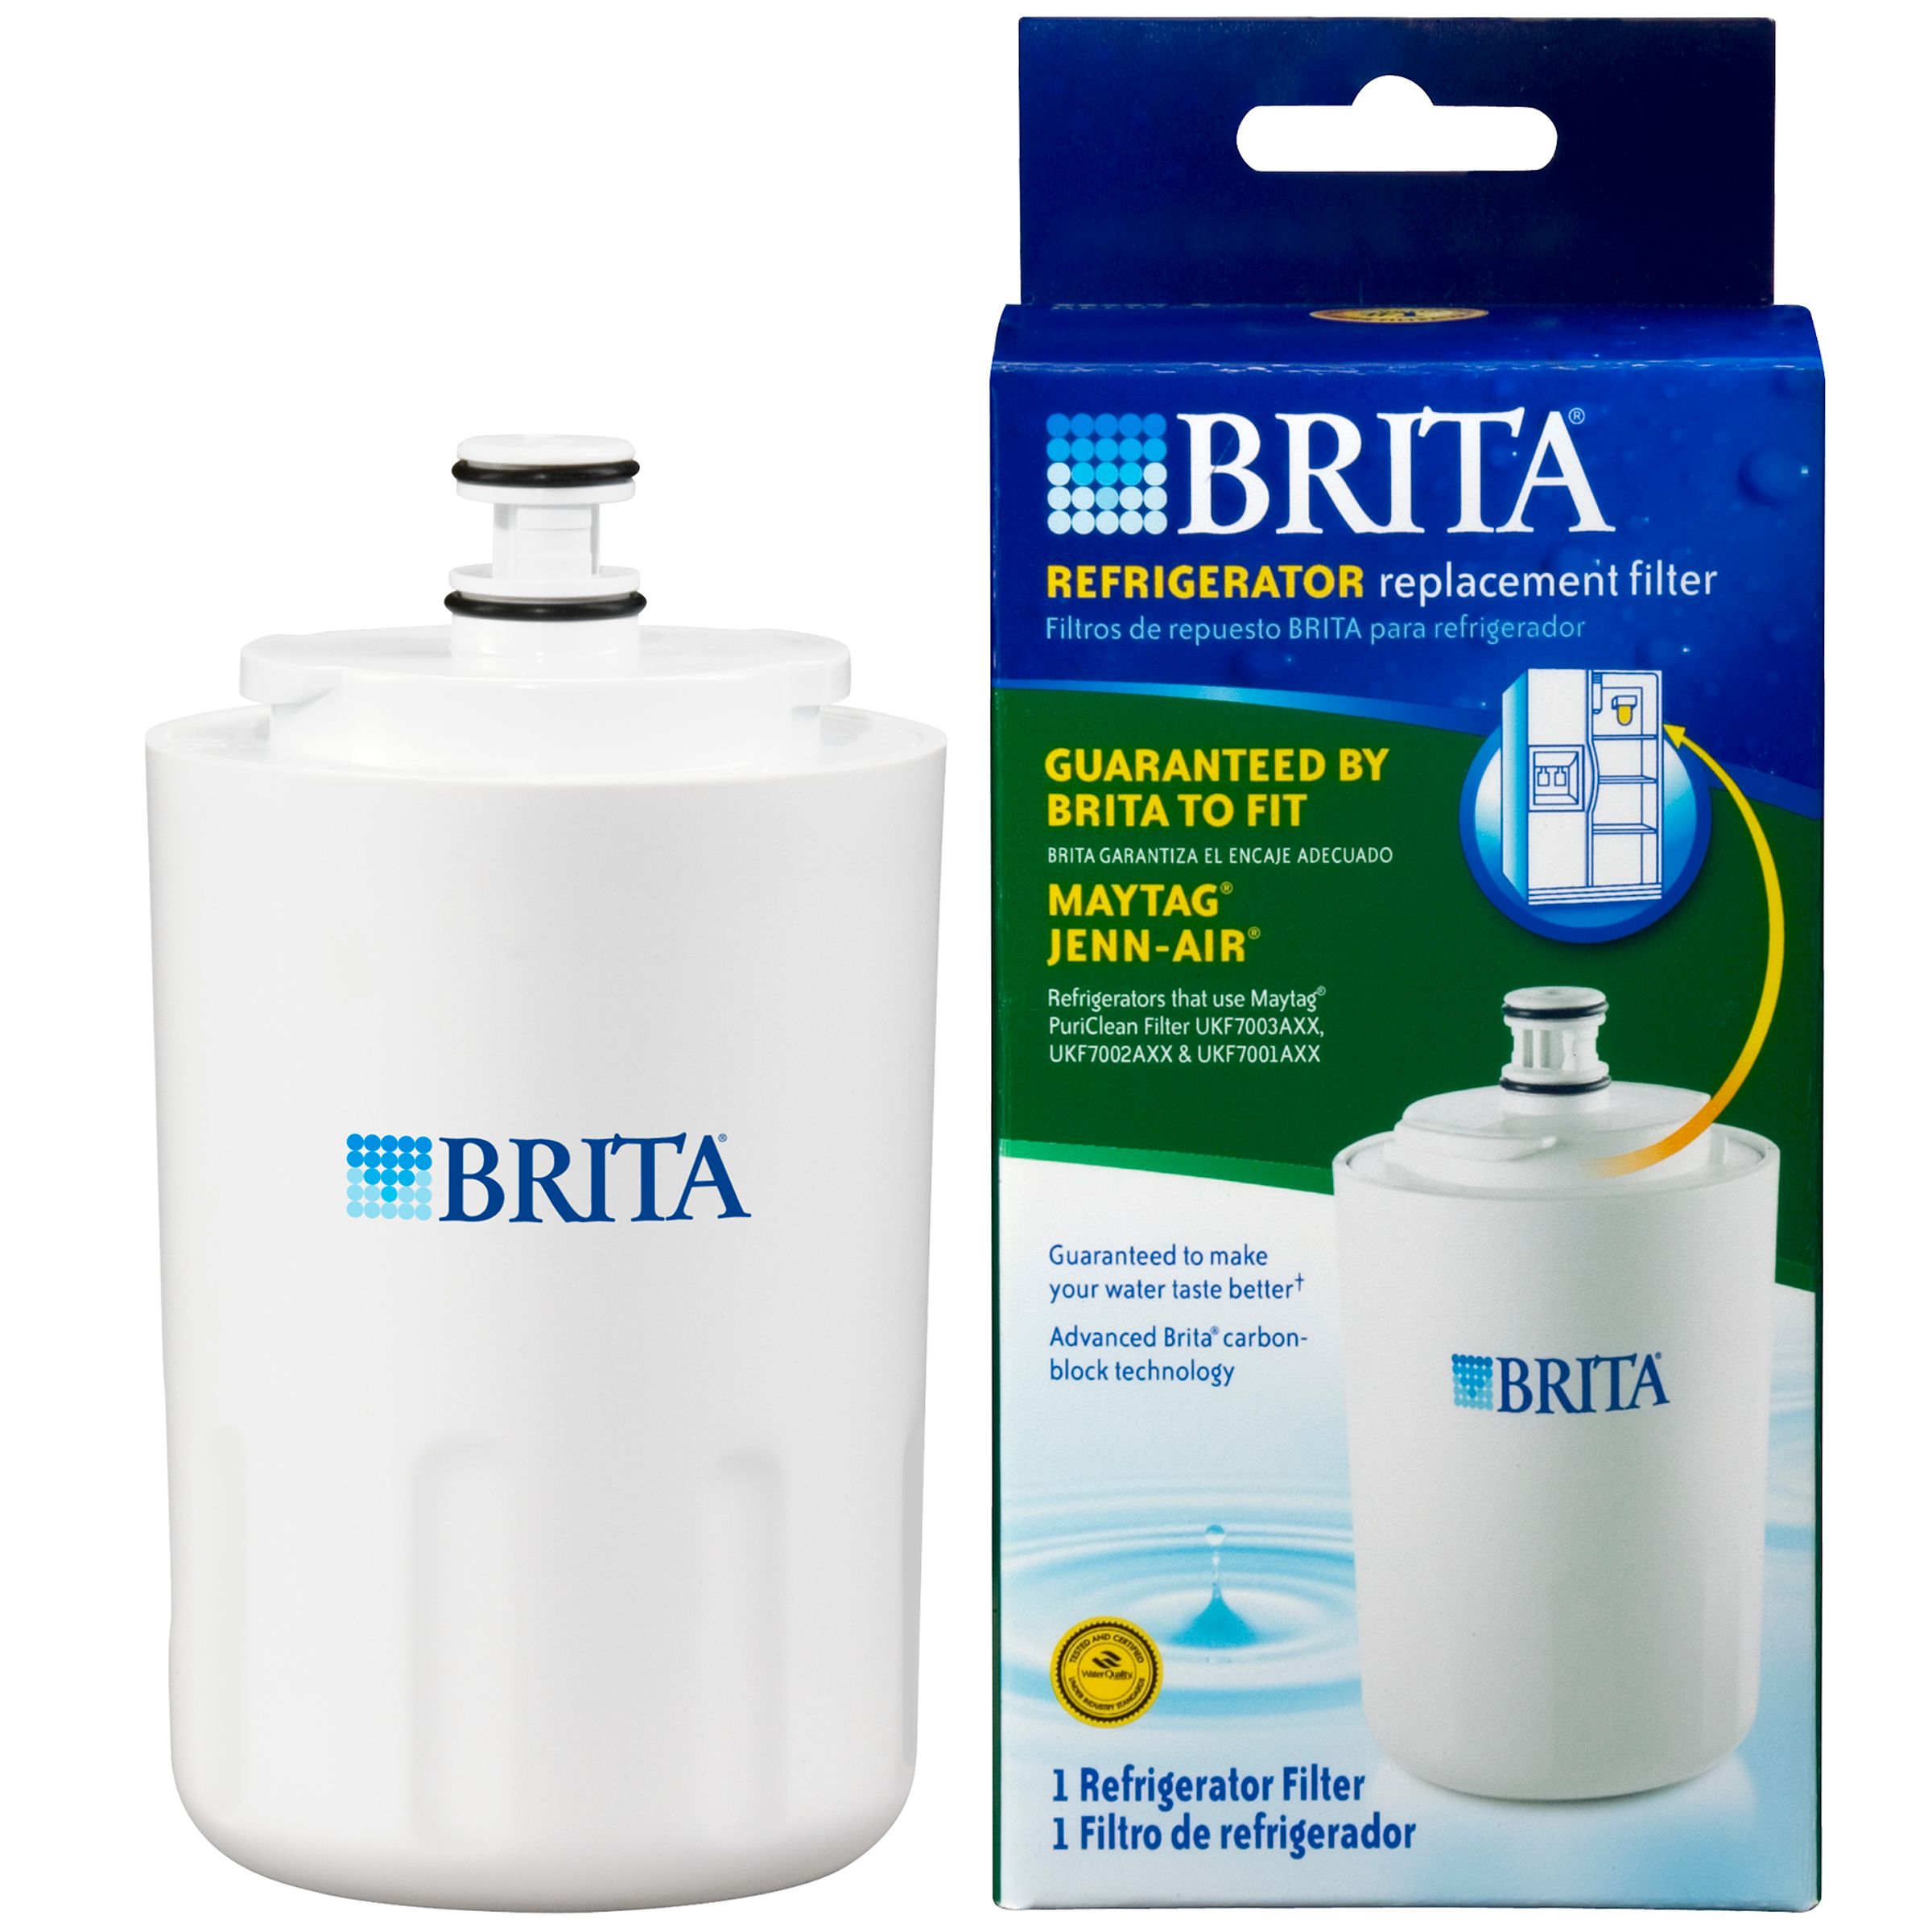 Brita 35054 Refrigerator Filter Replacement for Maytag and Jenn-Air